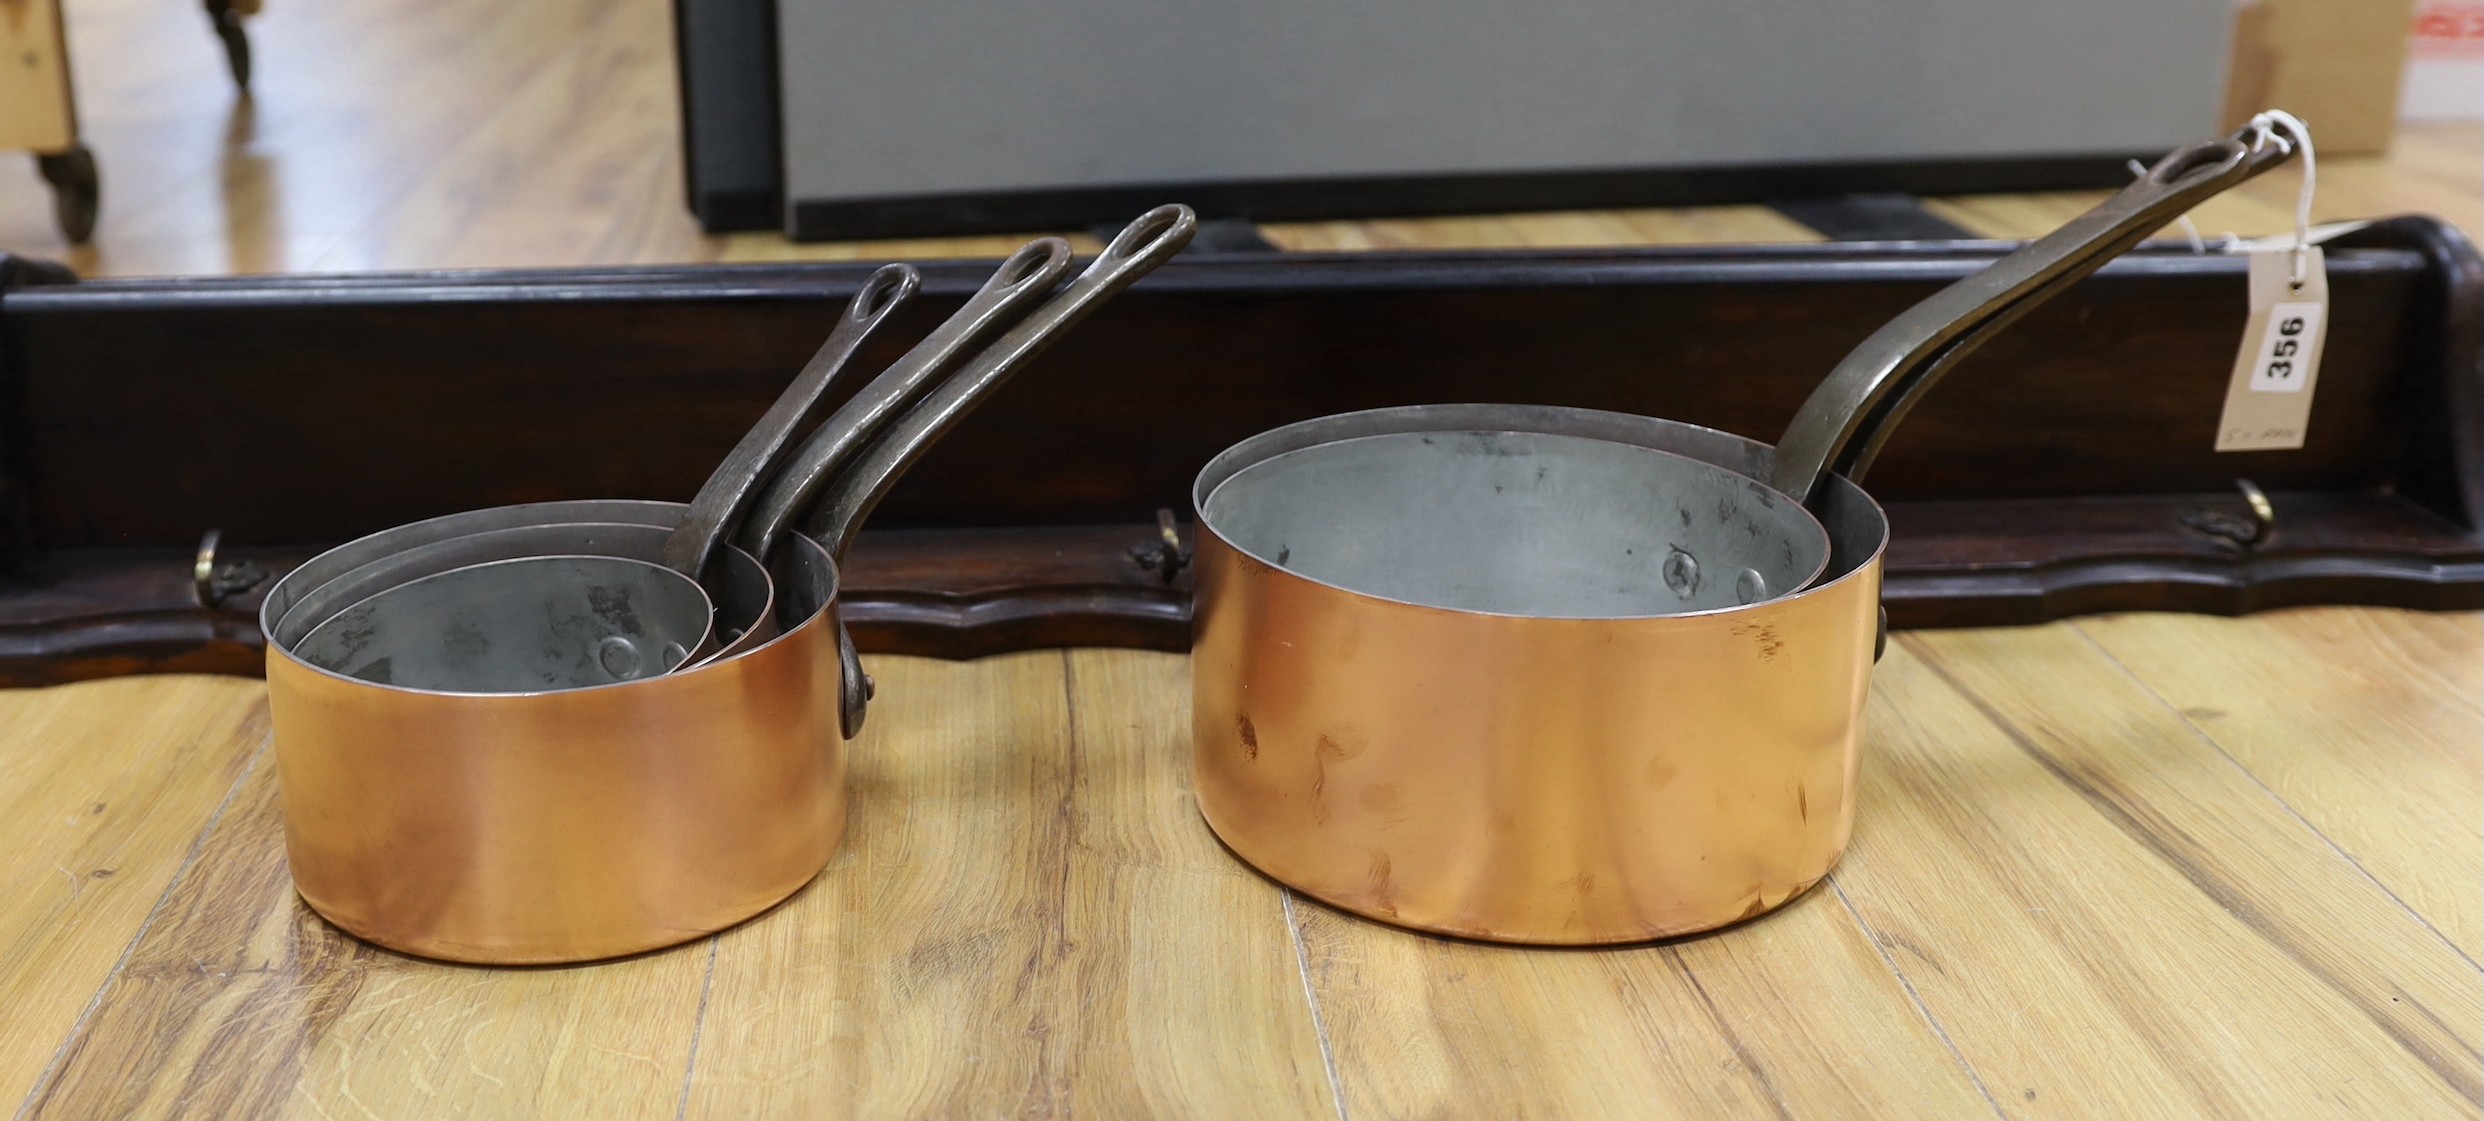 A set of five French copper saucepans, pendant from rack, rack 103cms long - Image 2 of 2